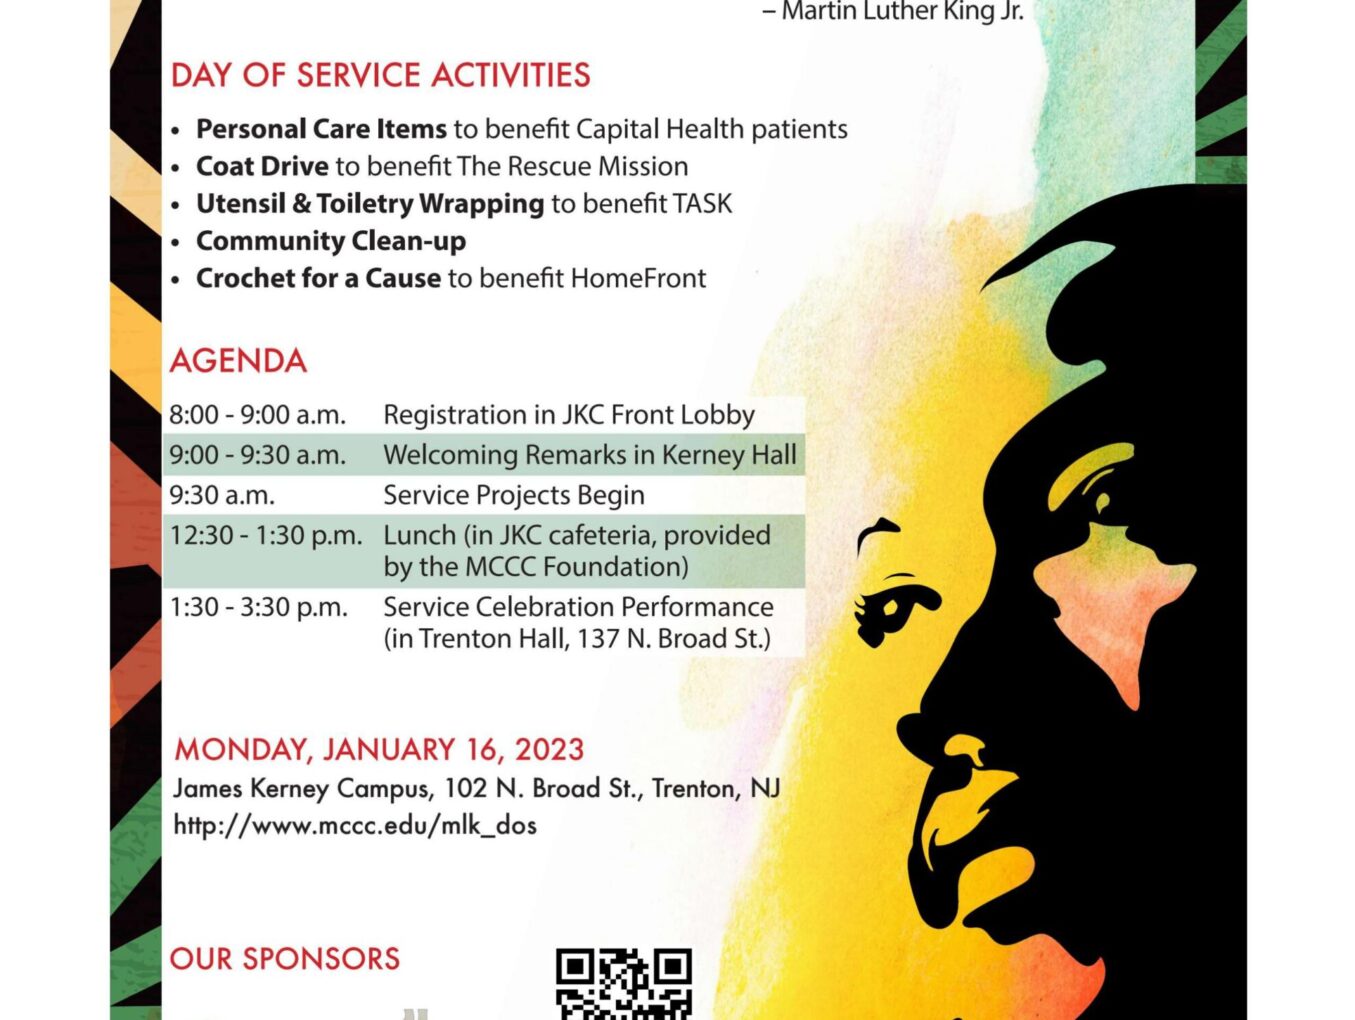 MCCC’s James Kerney Campus to Host MLK Day of Service